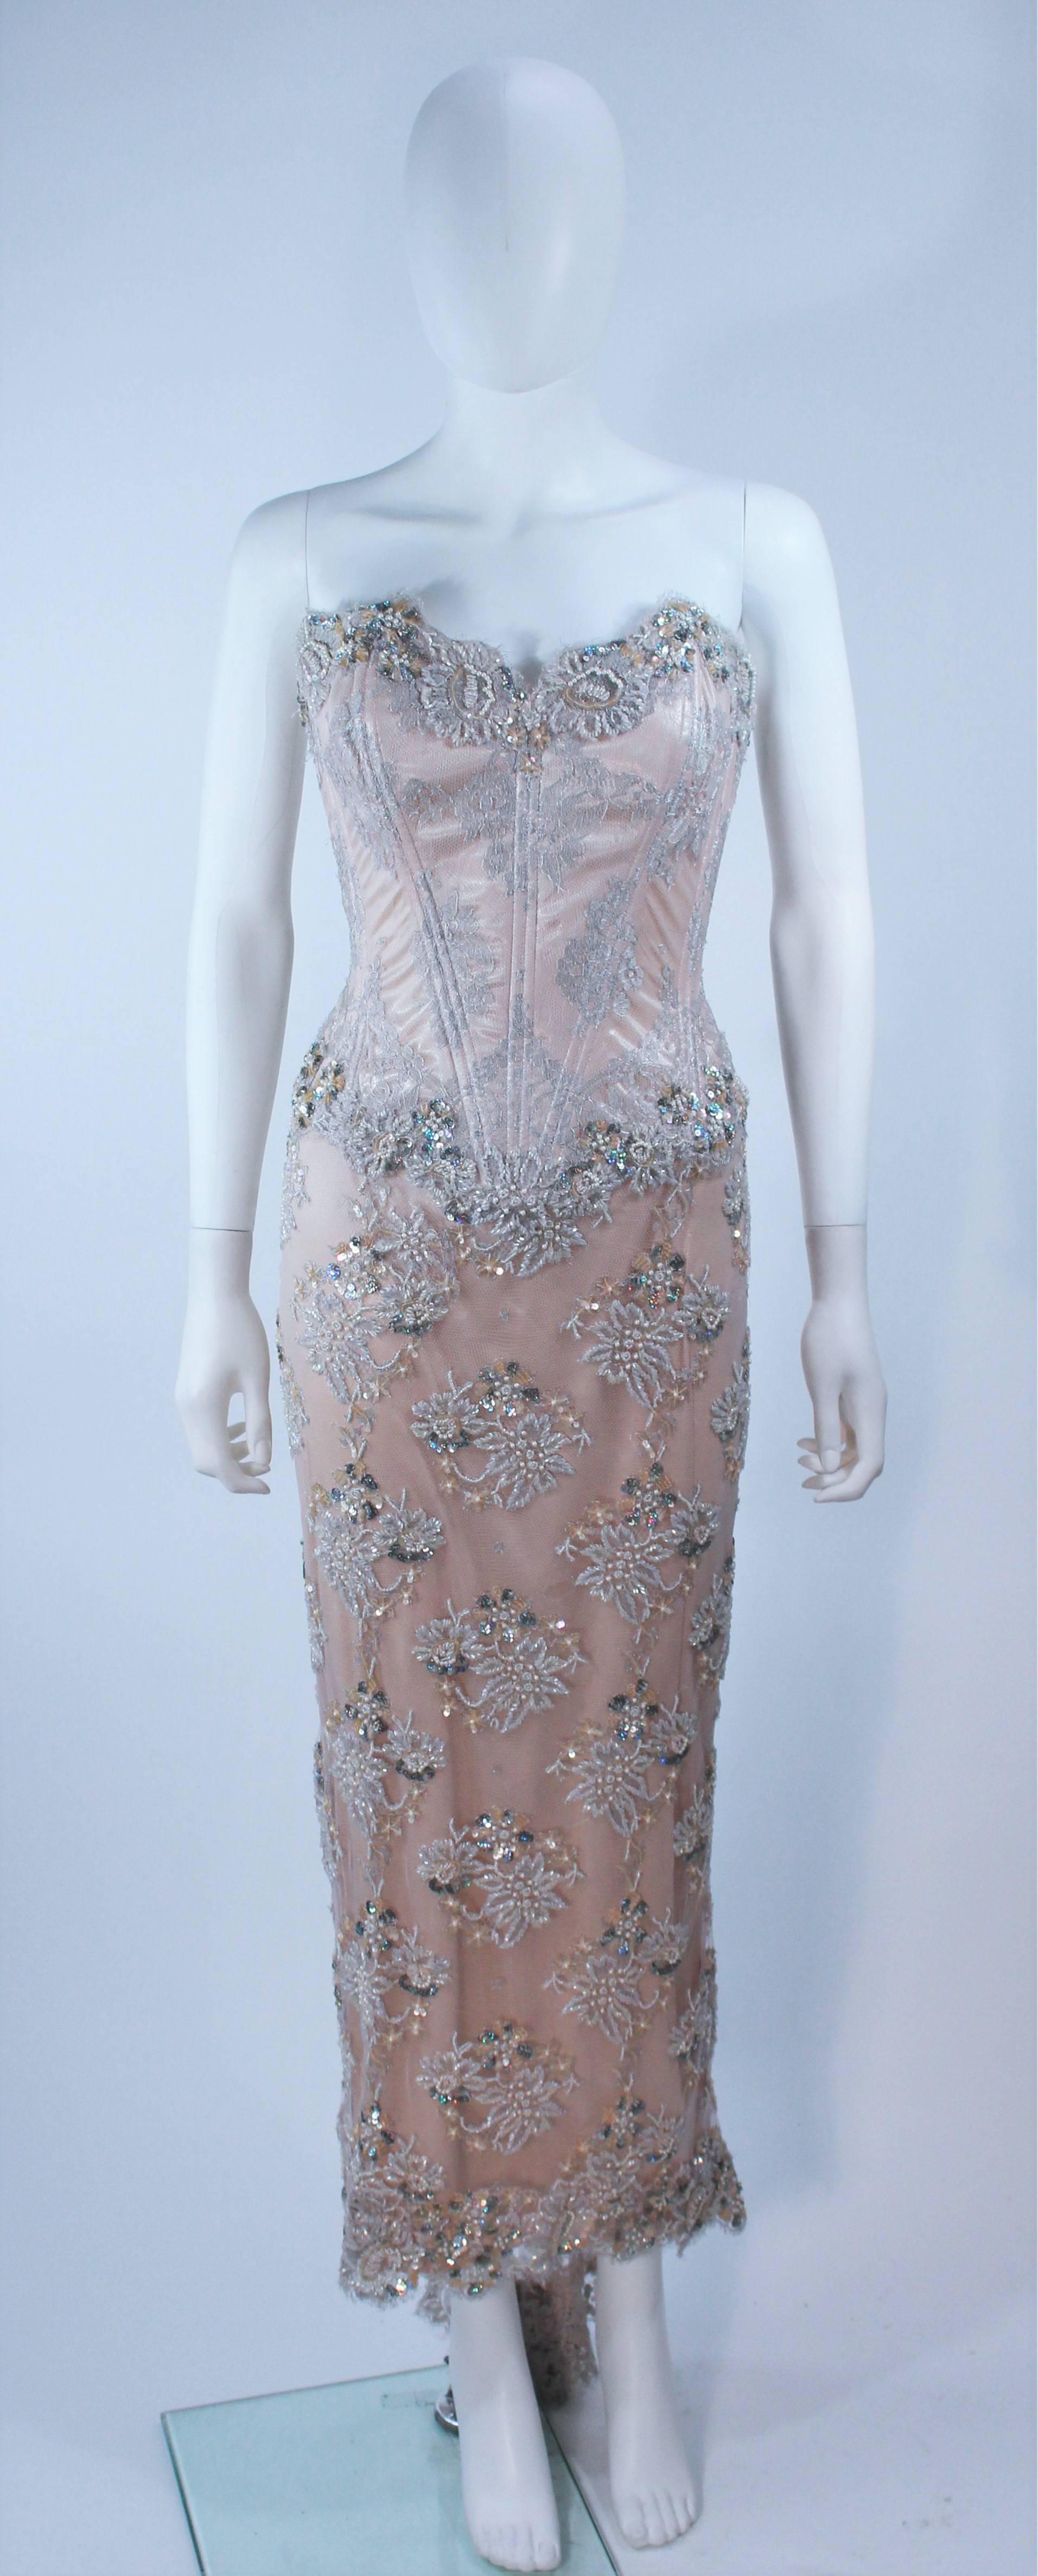 This Vicky Tiel  gown is composed of a beaded lace and silk in a blush hue. Features a boned corset upper and draped skirt. There is a center back zipper closure. In excellent condition.

  **Please cross-reference measurements for personal